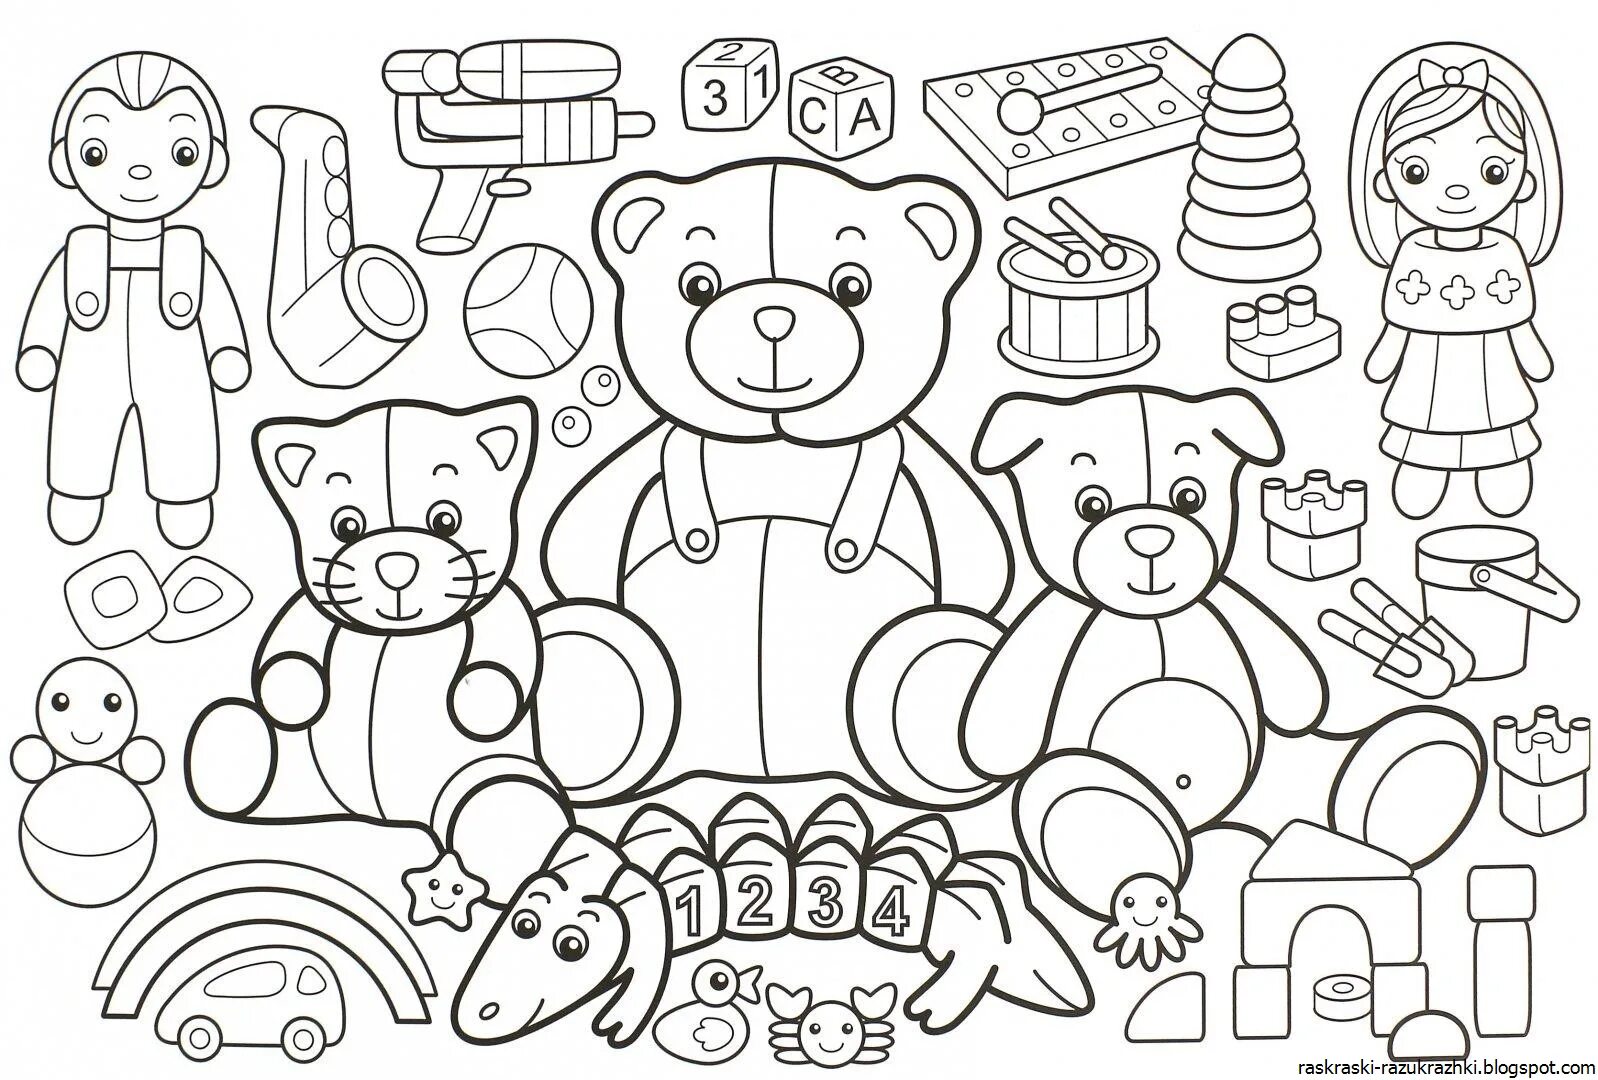 Online store spectacular coloring page